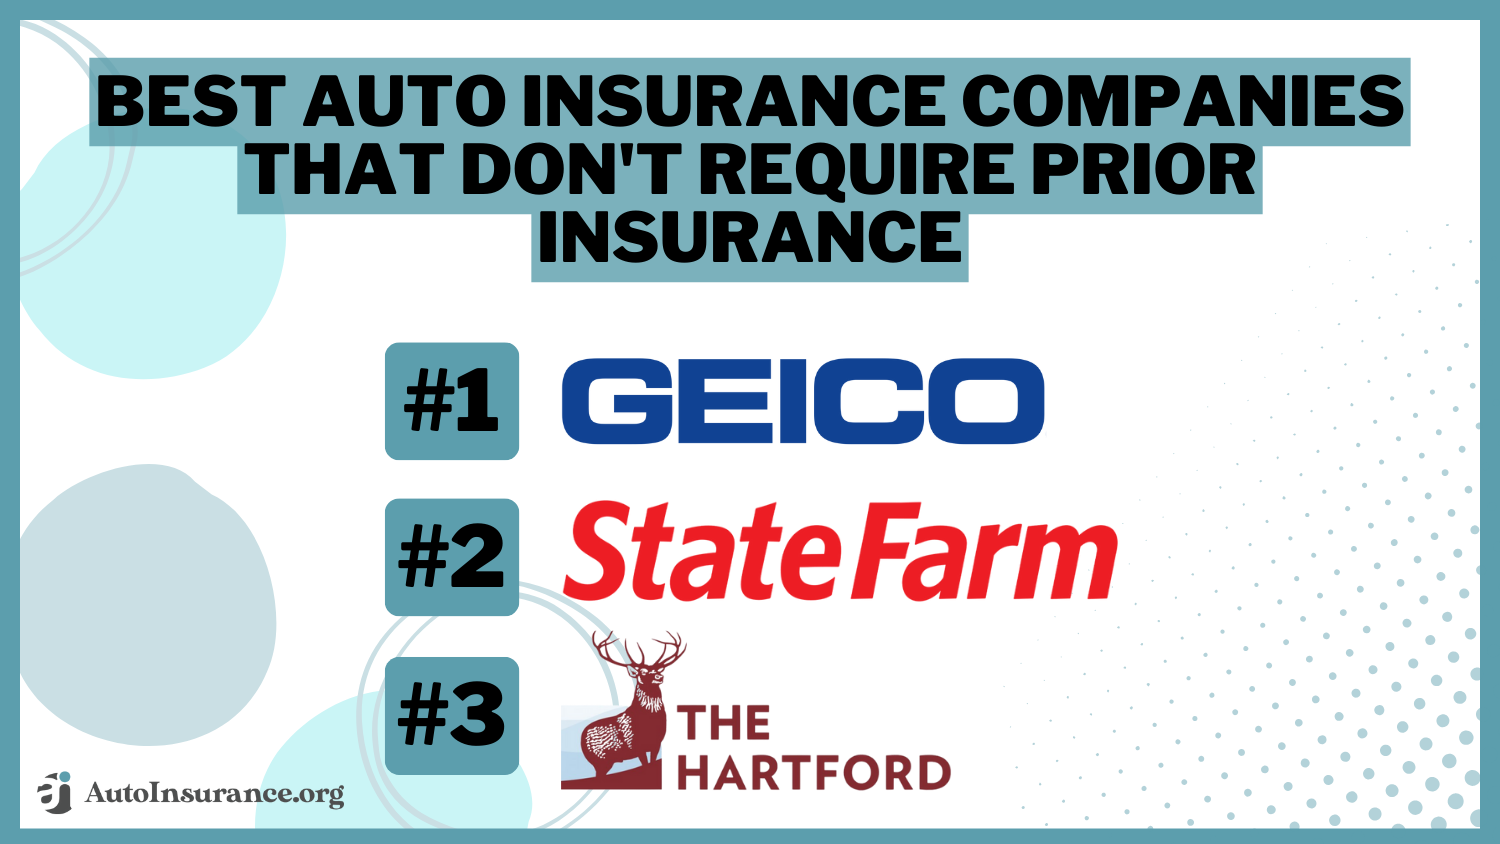 Geico, State Farm, The Hartford: Best Auto Insurance Companies That Don't Require Prior Insurance 